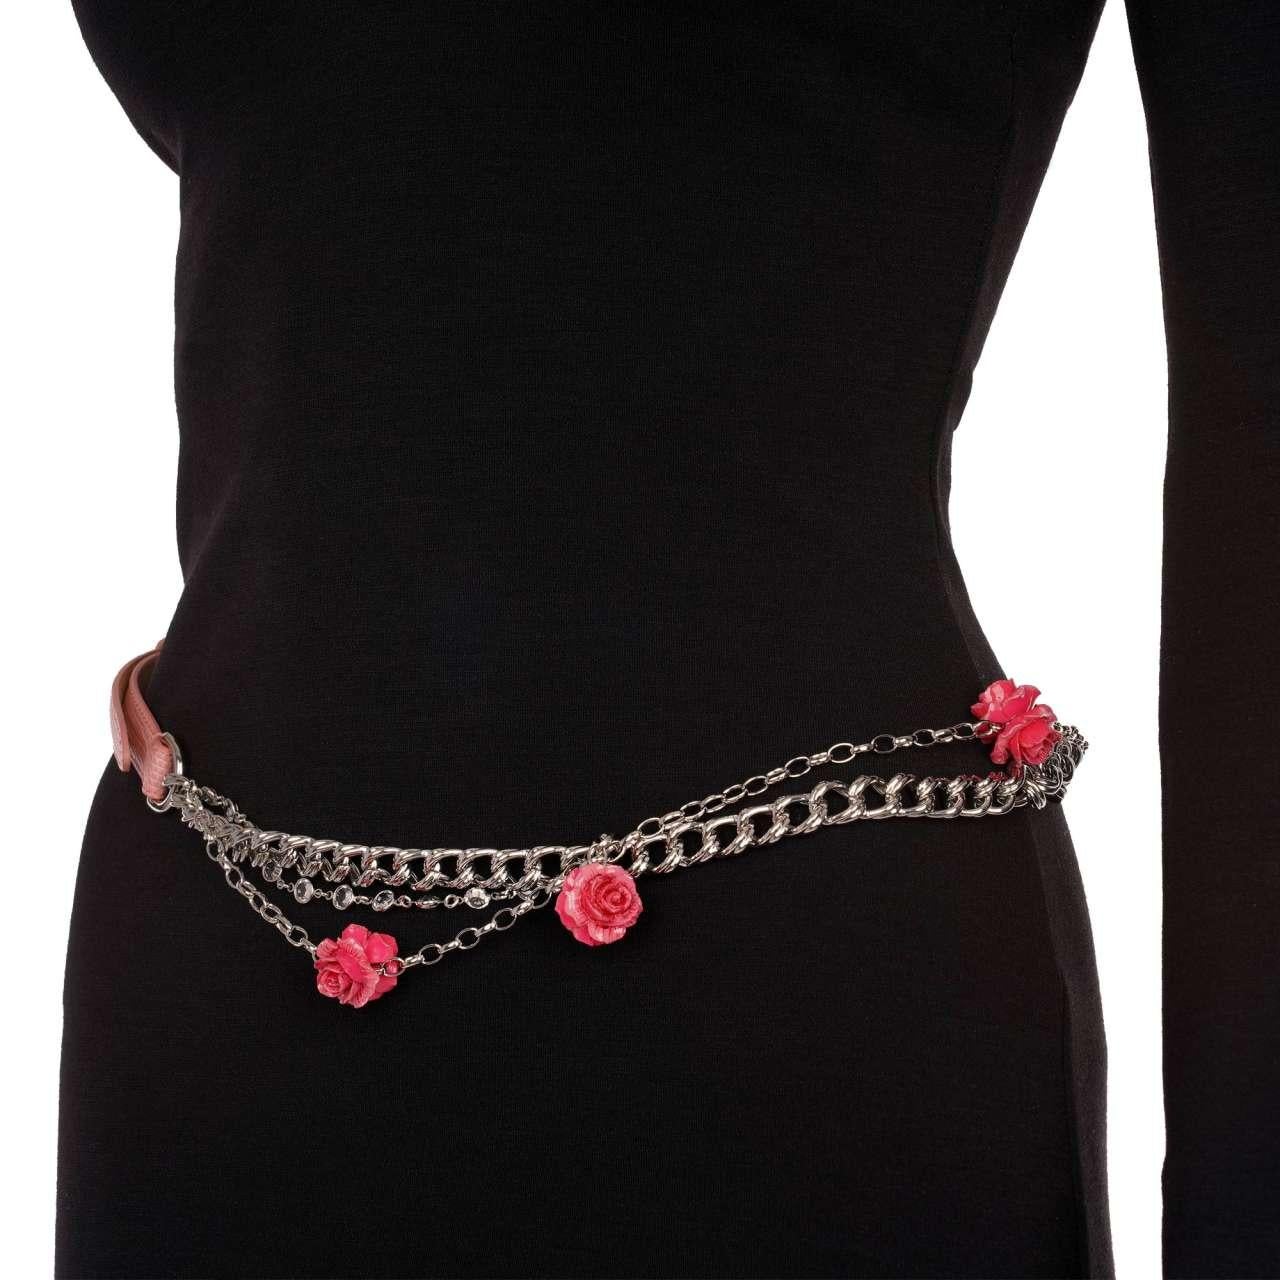 - Chain - Belt embelished with roses, crystals and lizzard structure leather in silver and pink by DOLCE & GABBANA - RUNWAY - Dolce & Gabbana Fashion Show - New with tag - MADE IN ITALY - Modell: BE1321-A10951-80400 - Material: 81% Brass, 15% Resin,